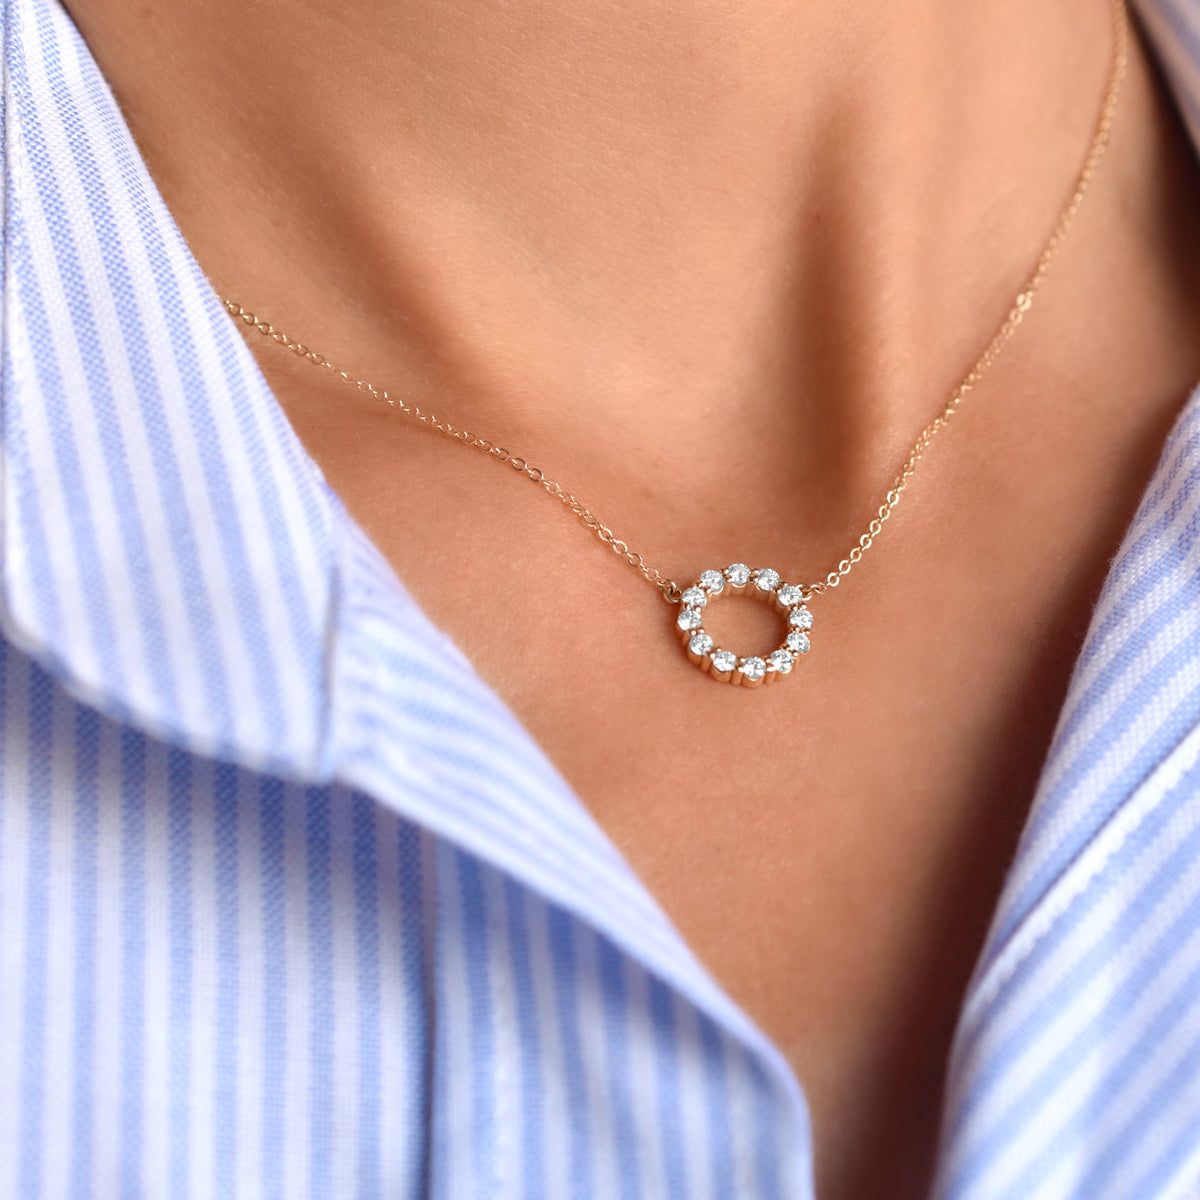 Rosecliff Circle Diamond Necklace in 14k Gold (April)